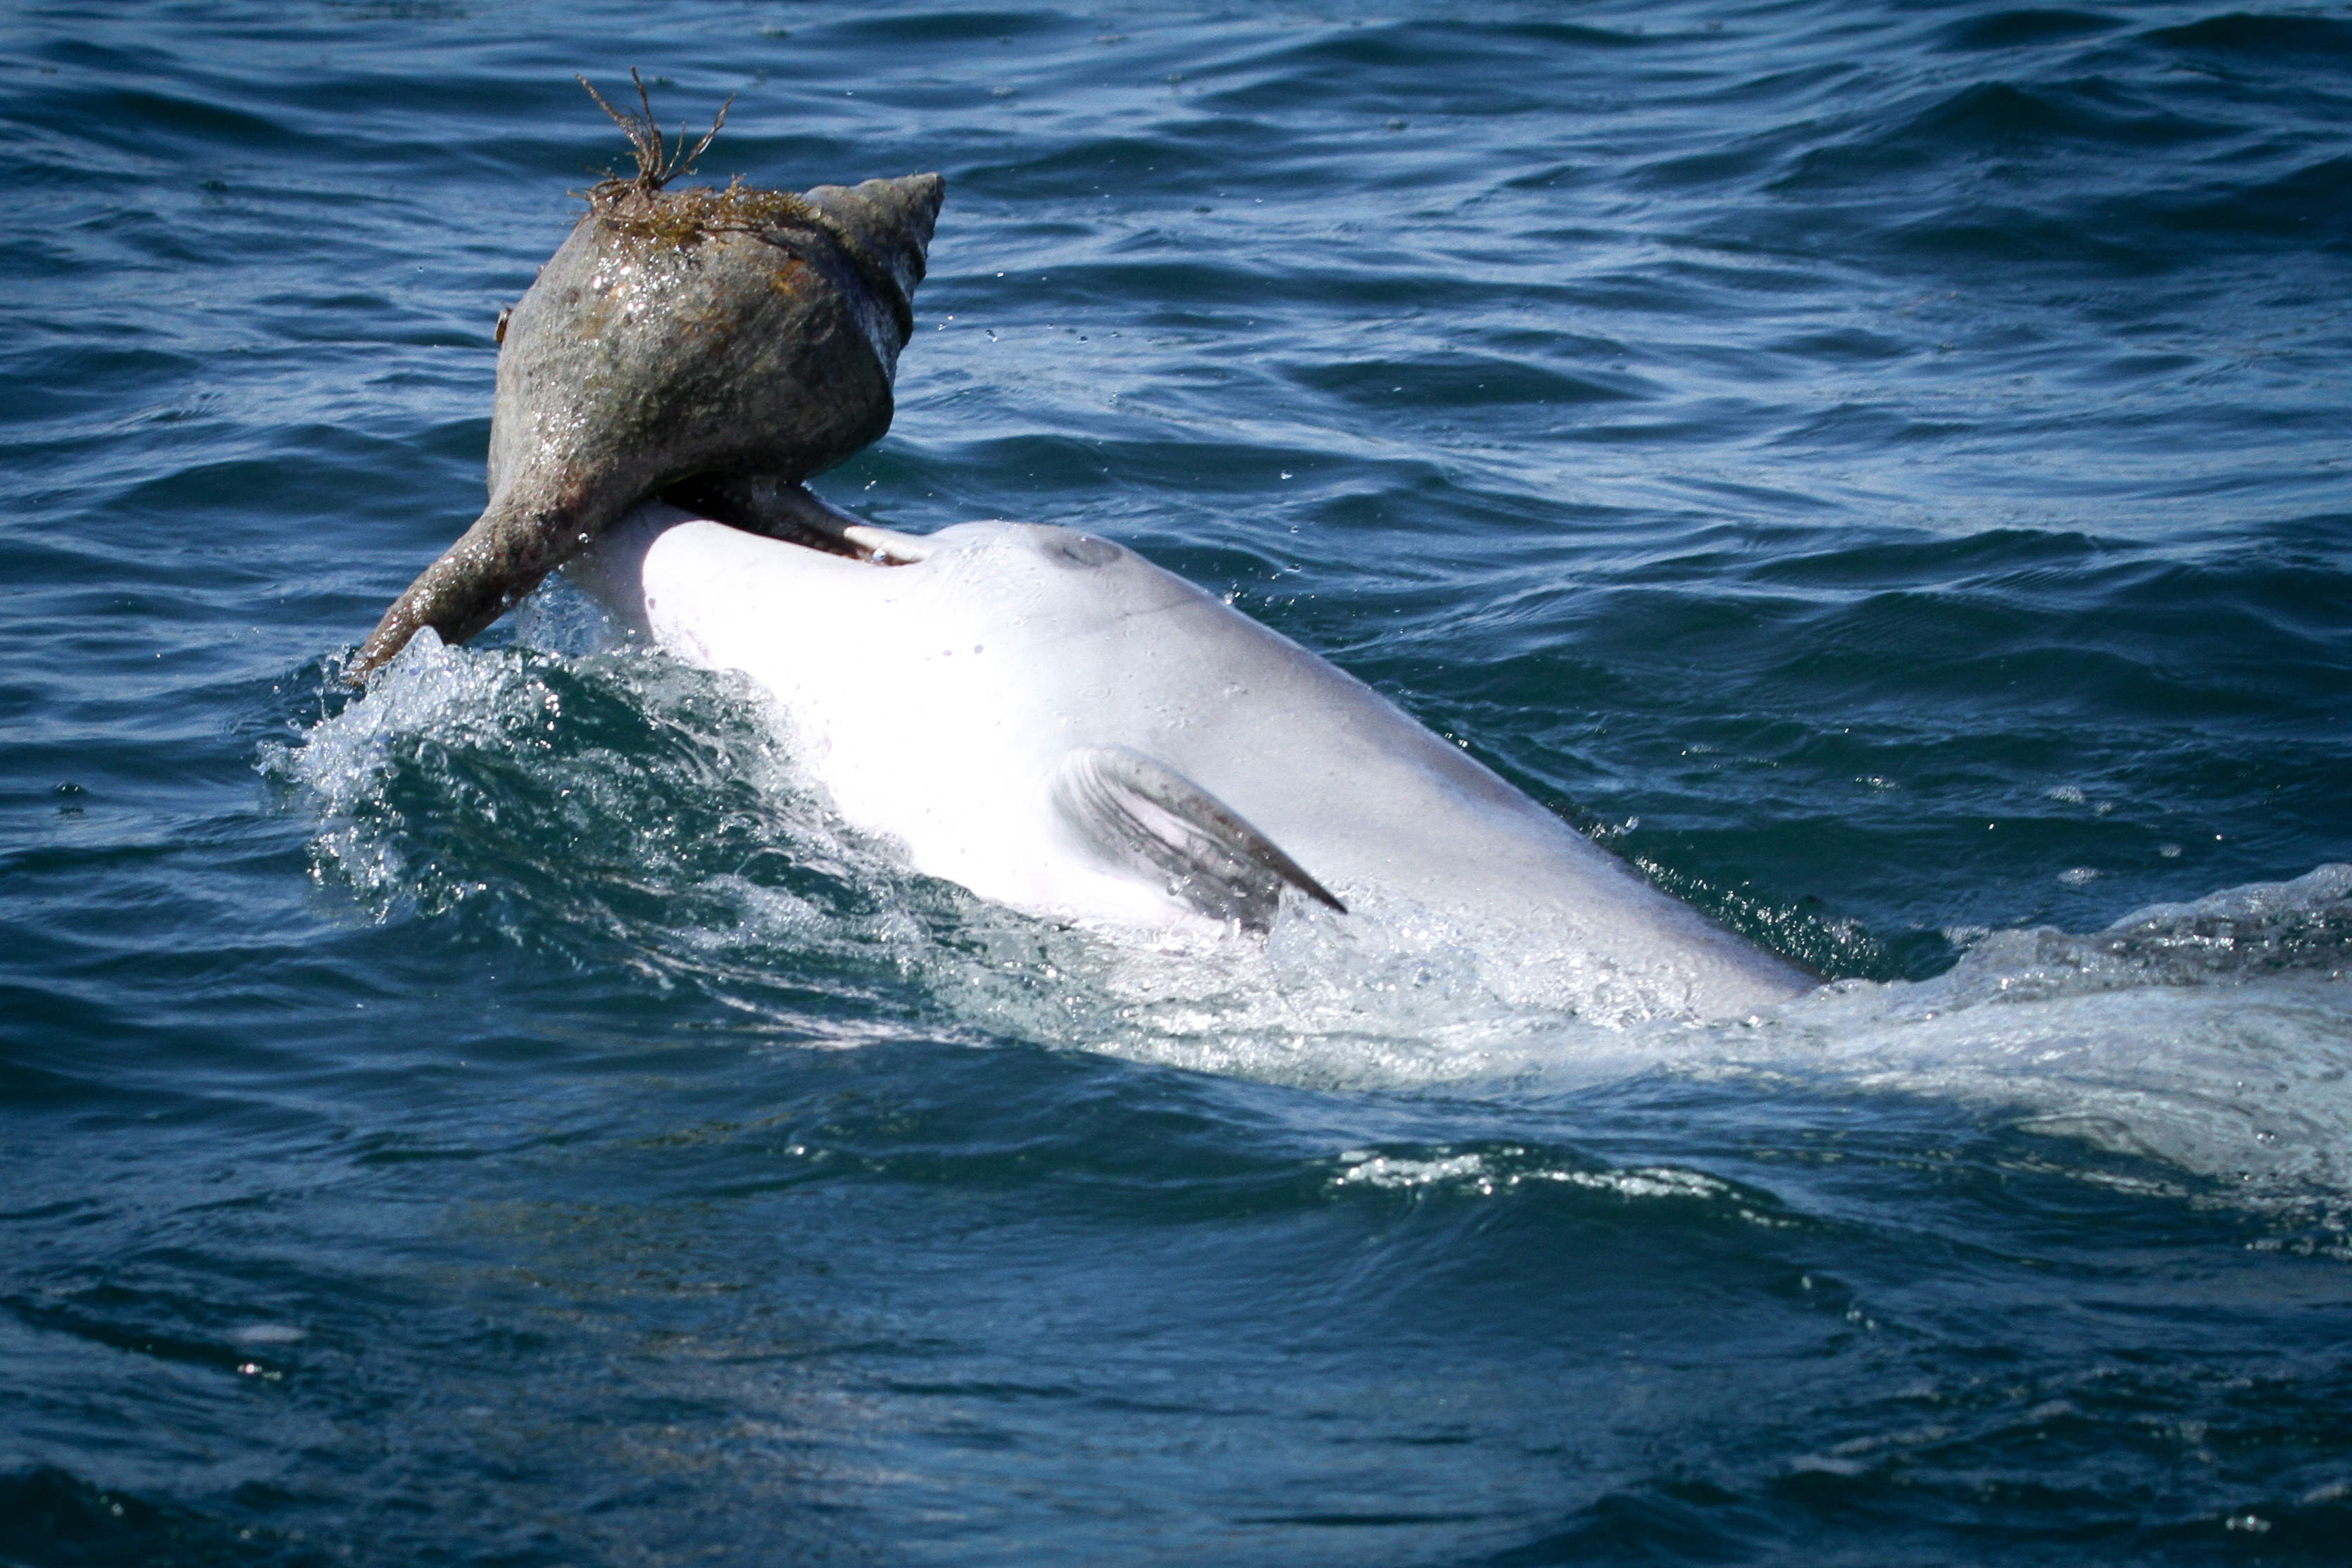 A capture of ‘shelling’ — a bottlenose dolphin in Shark bay catching prey using an empty shell